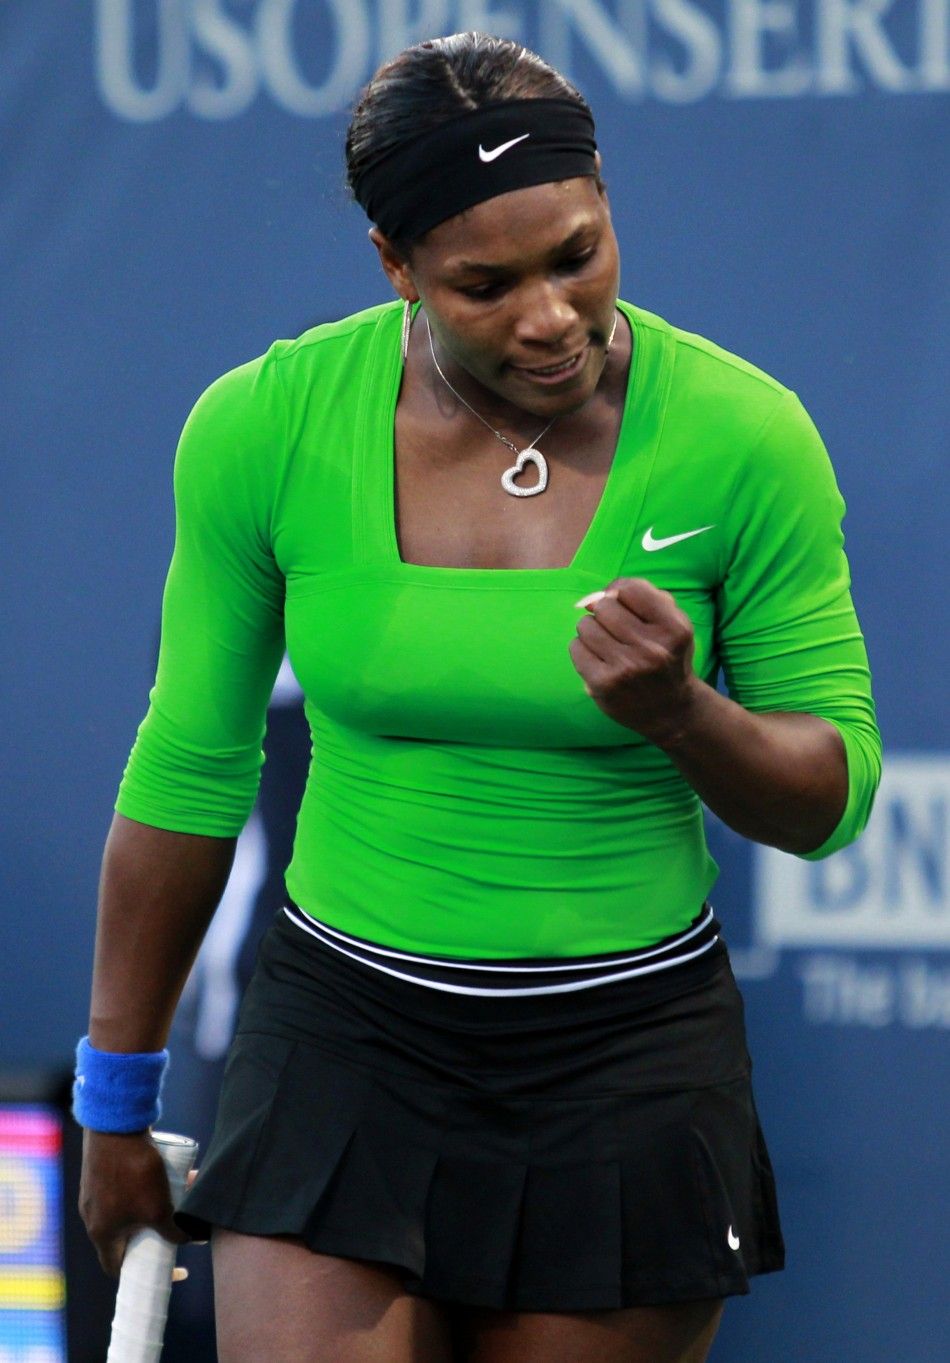 No. 6 Serena Williams - Total Earning 10.5 million